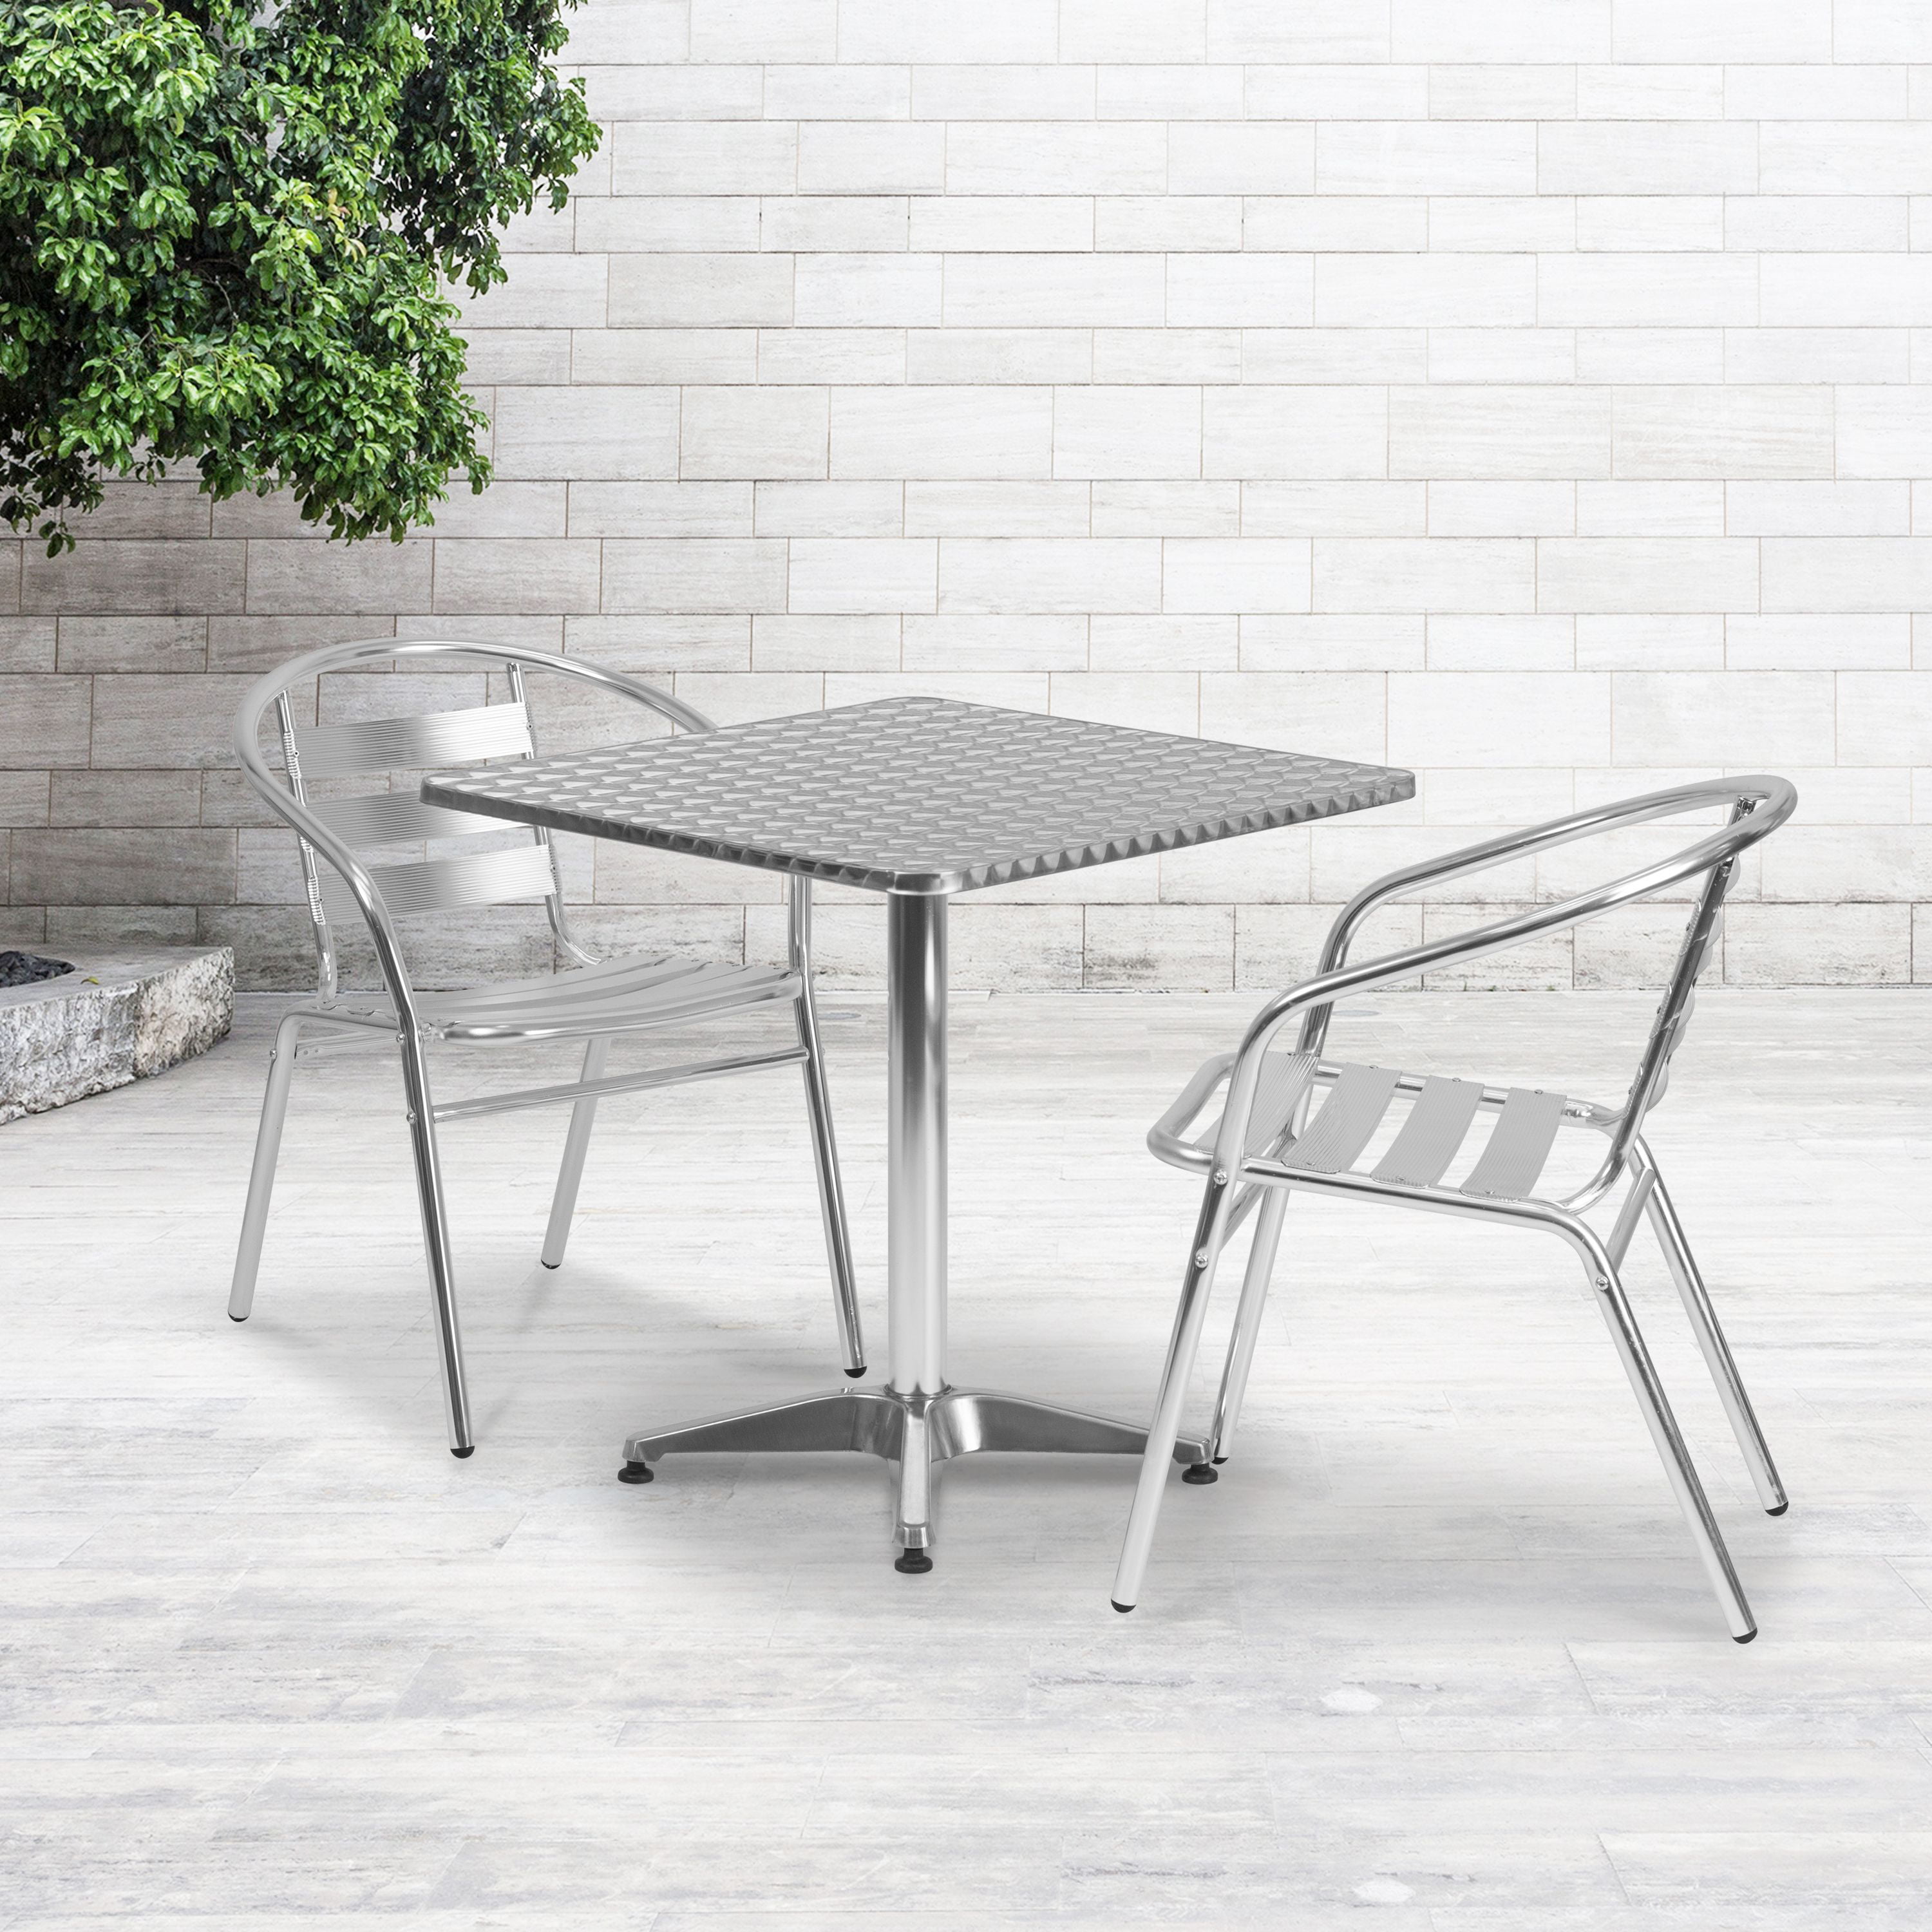 Flash Furniture TLH-053-1-GG Square Aluminum Indoor Outdoor Table with Base 23.5-Feet